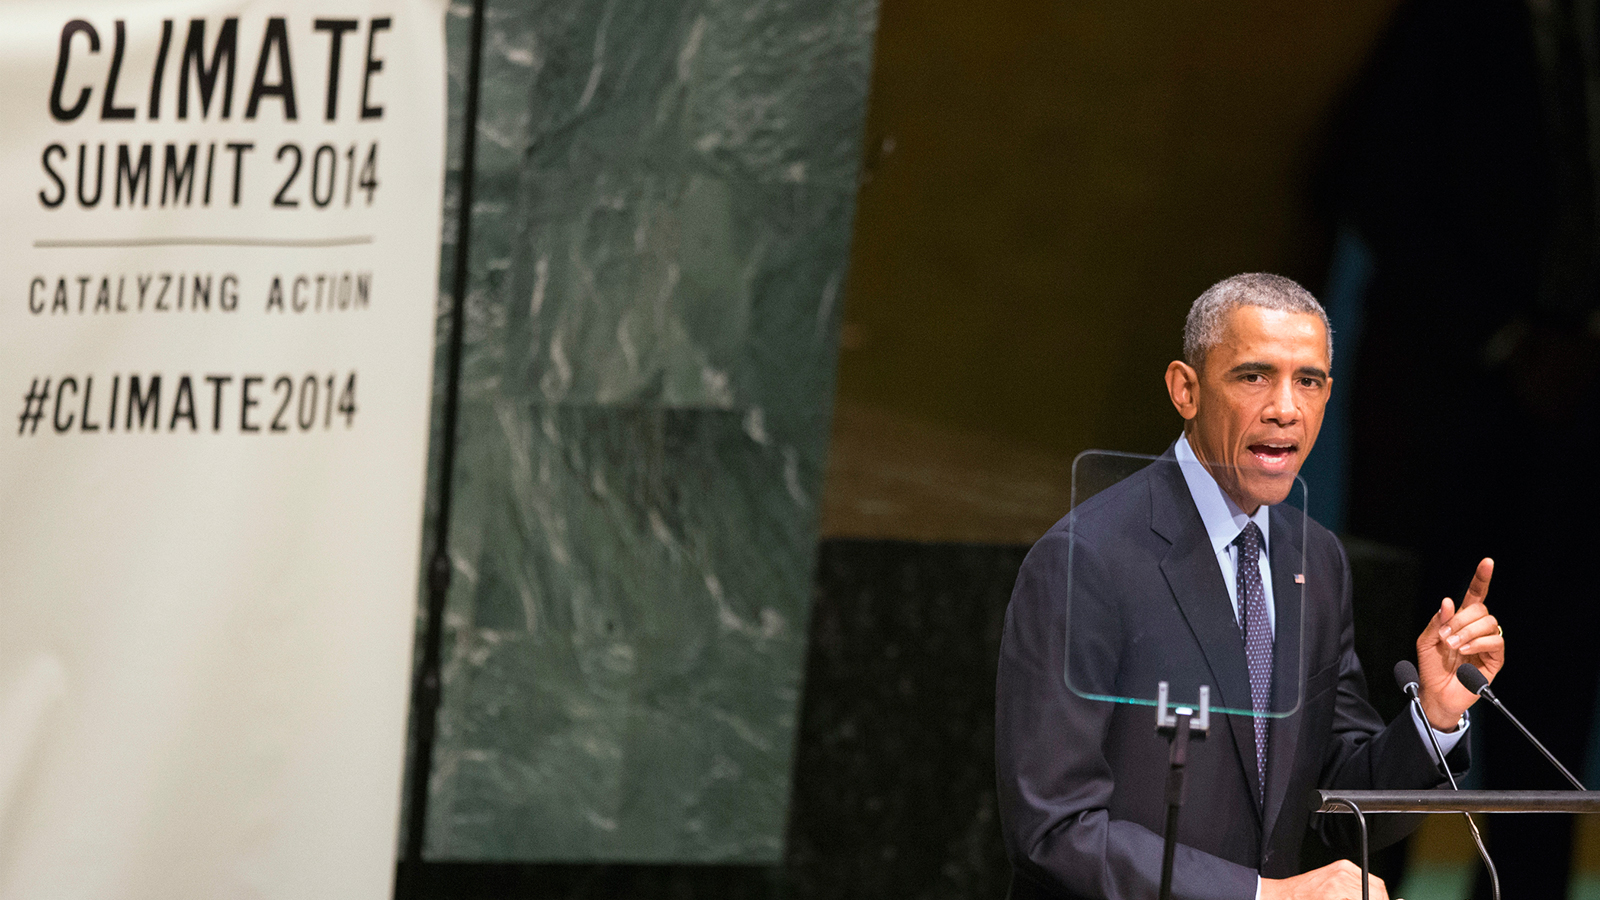 U.S. President Barack Obama speaks during the Climate Summit at the U.N. headquarters in New York September 23, 2014.